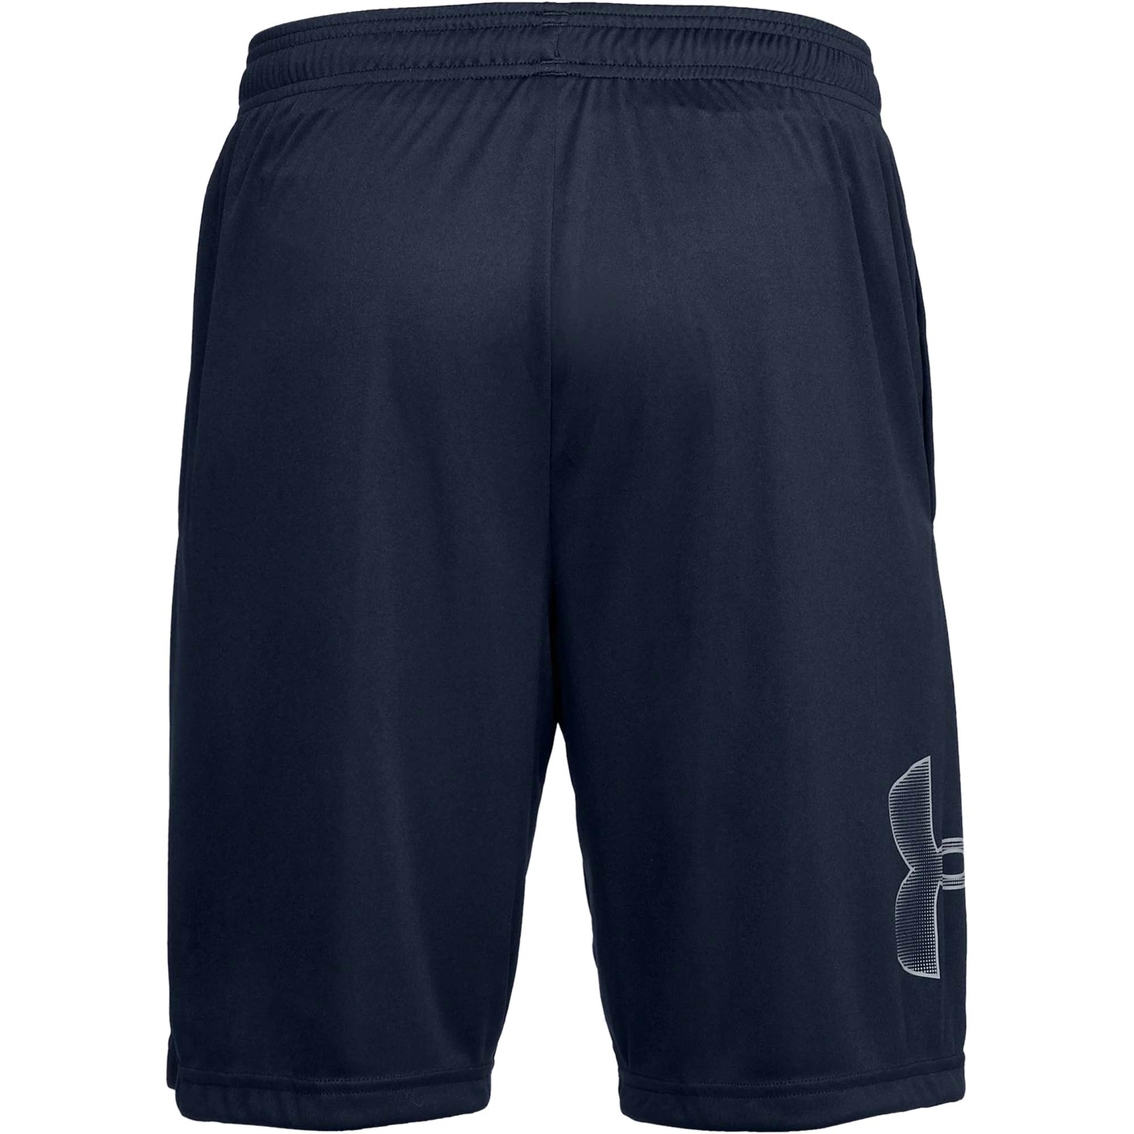 Under Armour Tech Graphic Shorts - Image 5 of 5